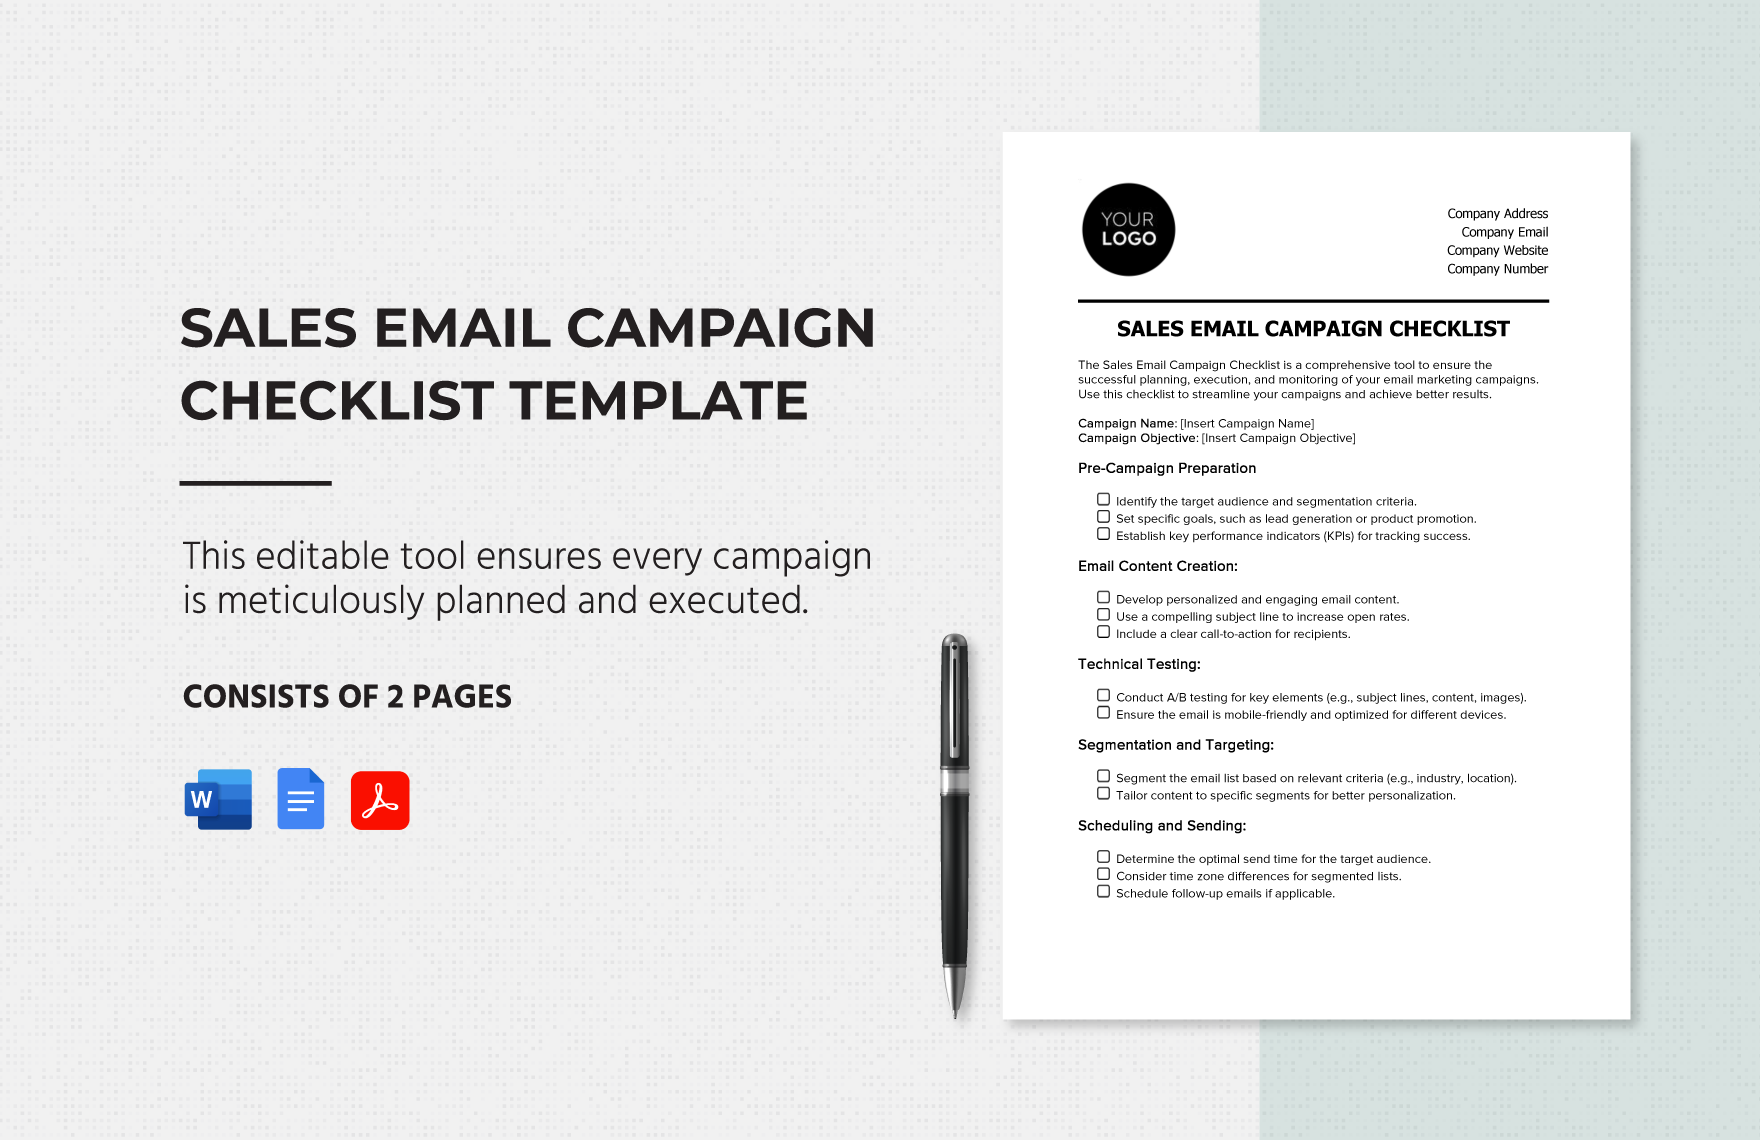 Sales Email Campaign Checklist Template in Word, Google Docs, PDF